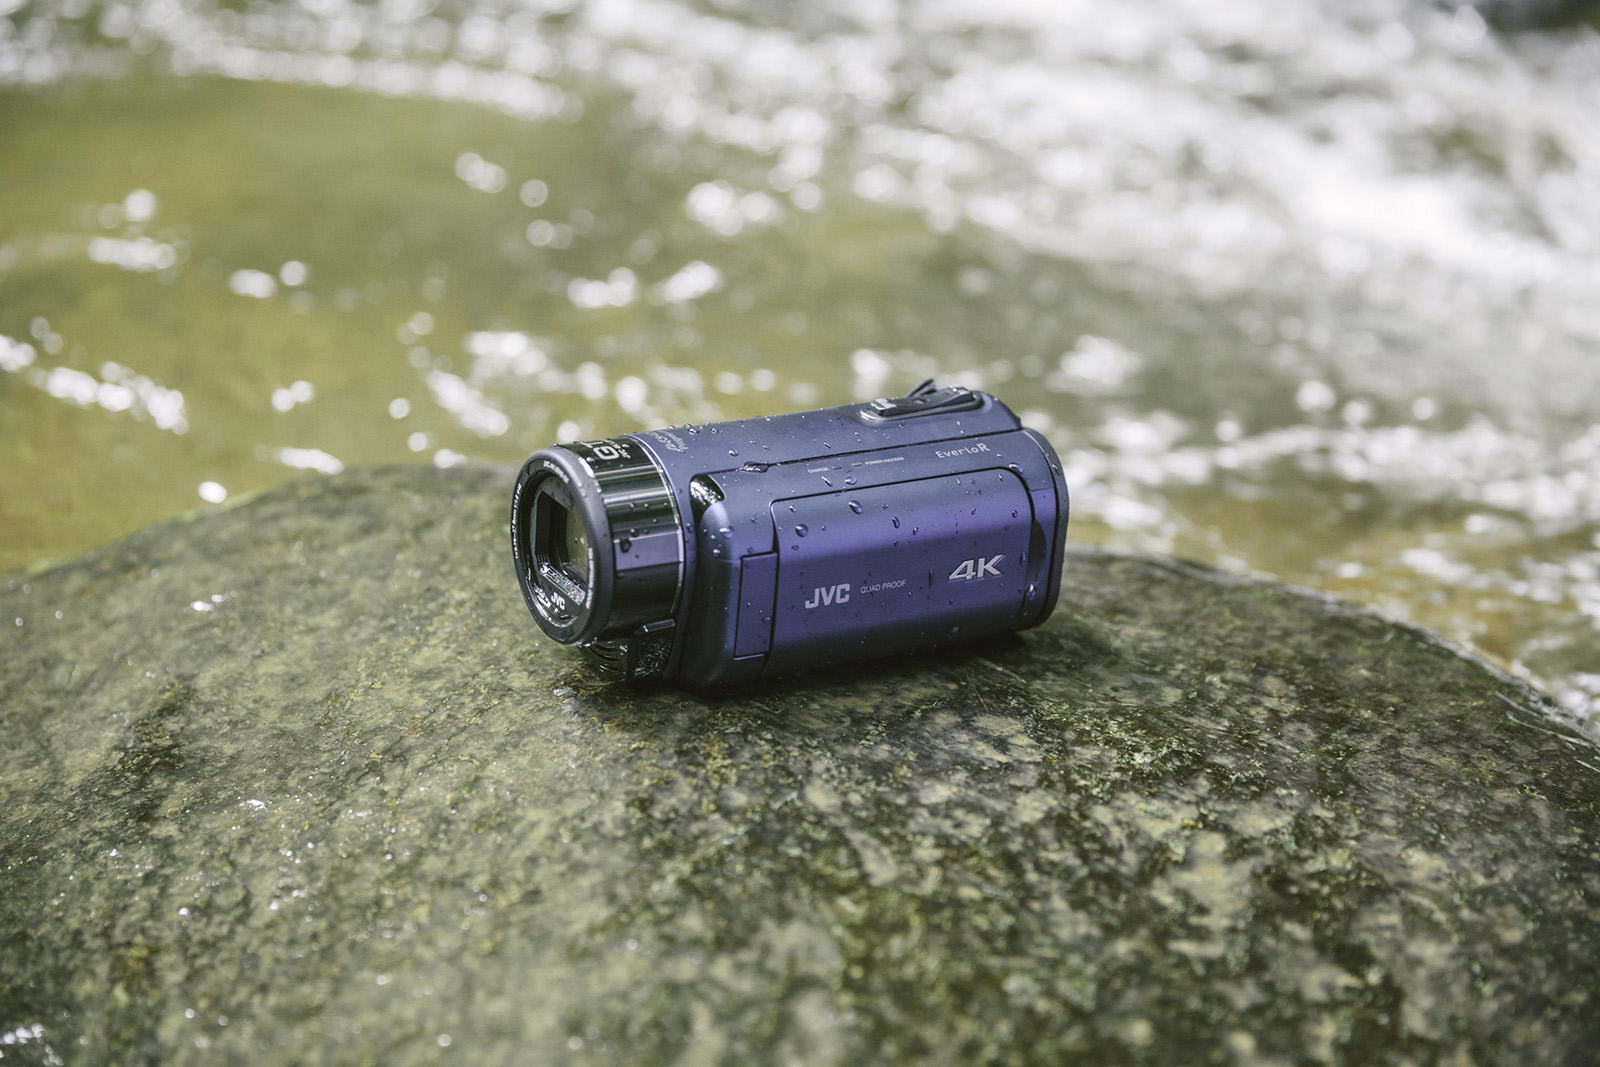 JVC Designed Waterproof Camcorders for Action Camera Durability 